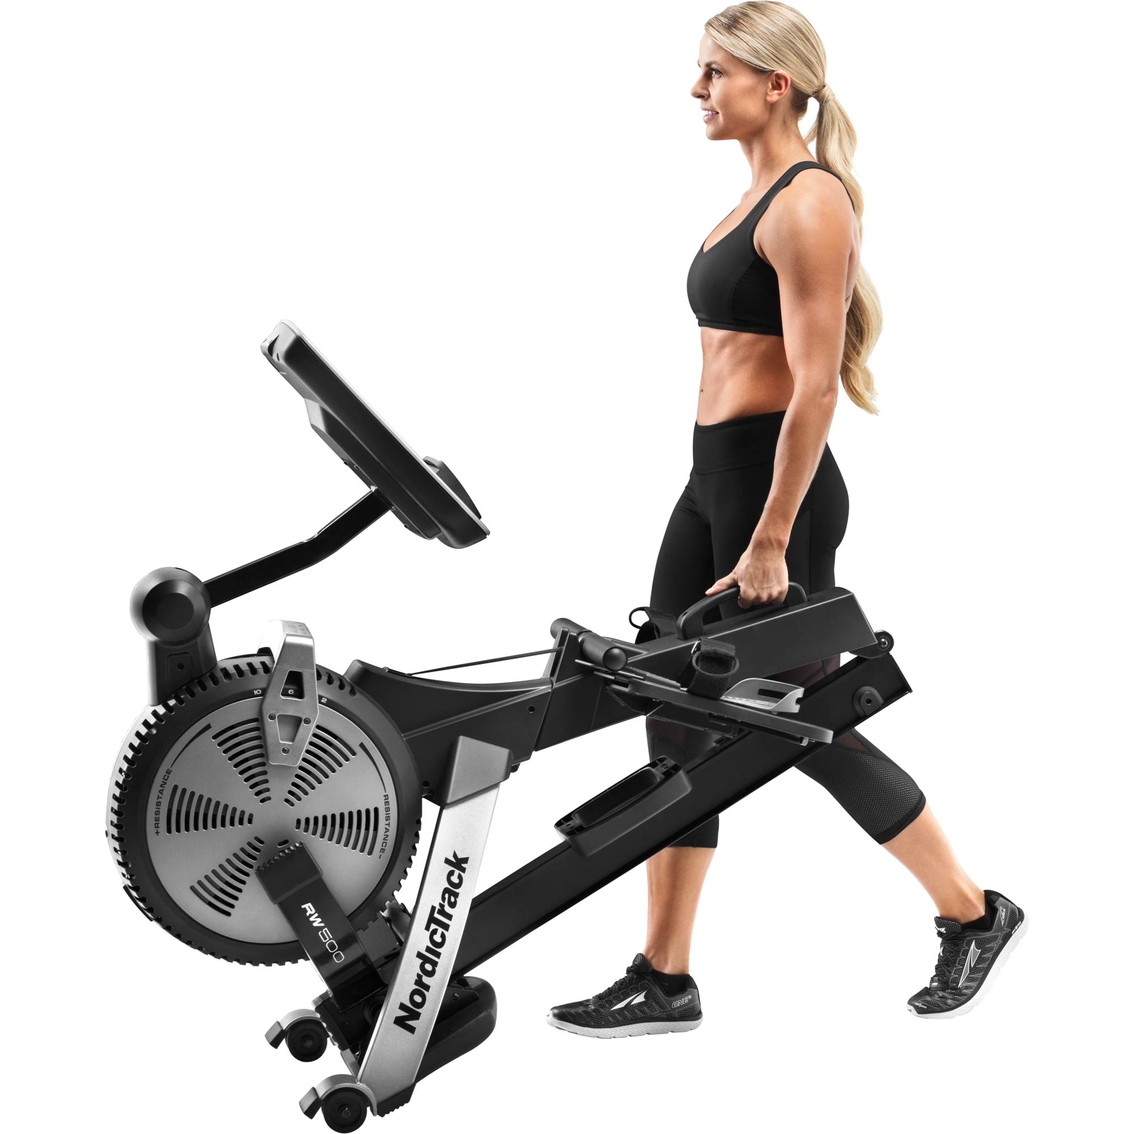 NordicTrack RW500 Rower - Image 2 of 2